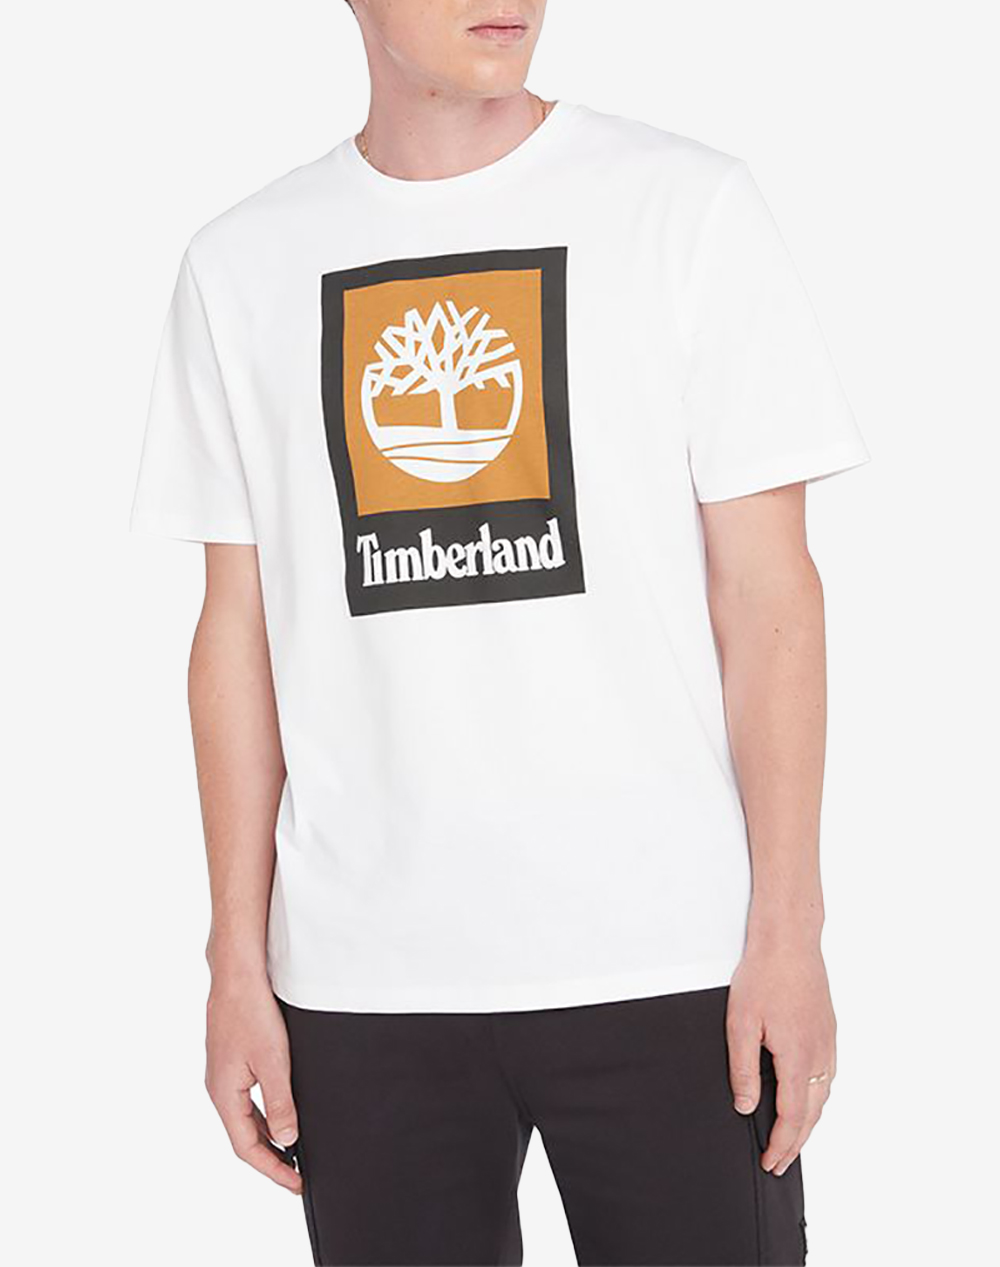 TIMBERLAND STLG Colored Short Sleeve Te TB0A5QS2-100 White